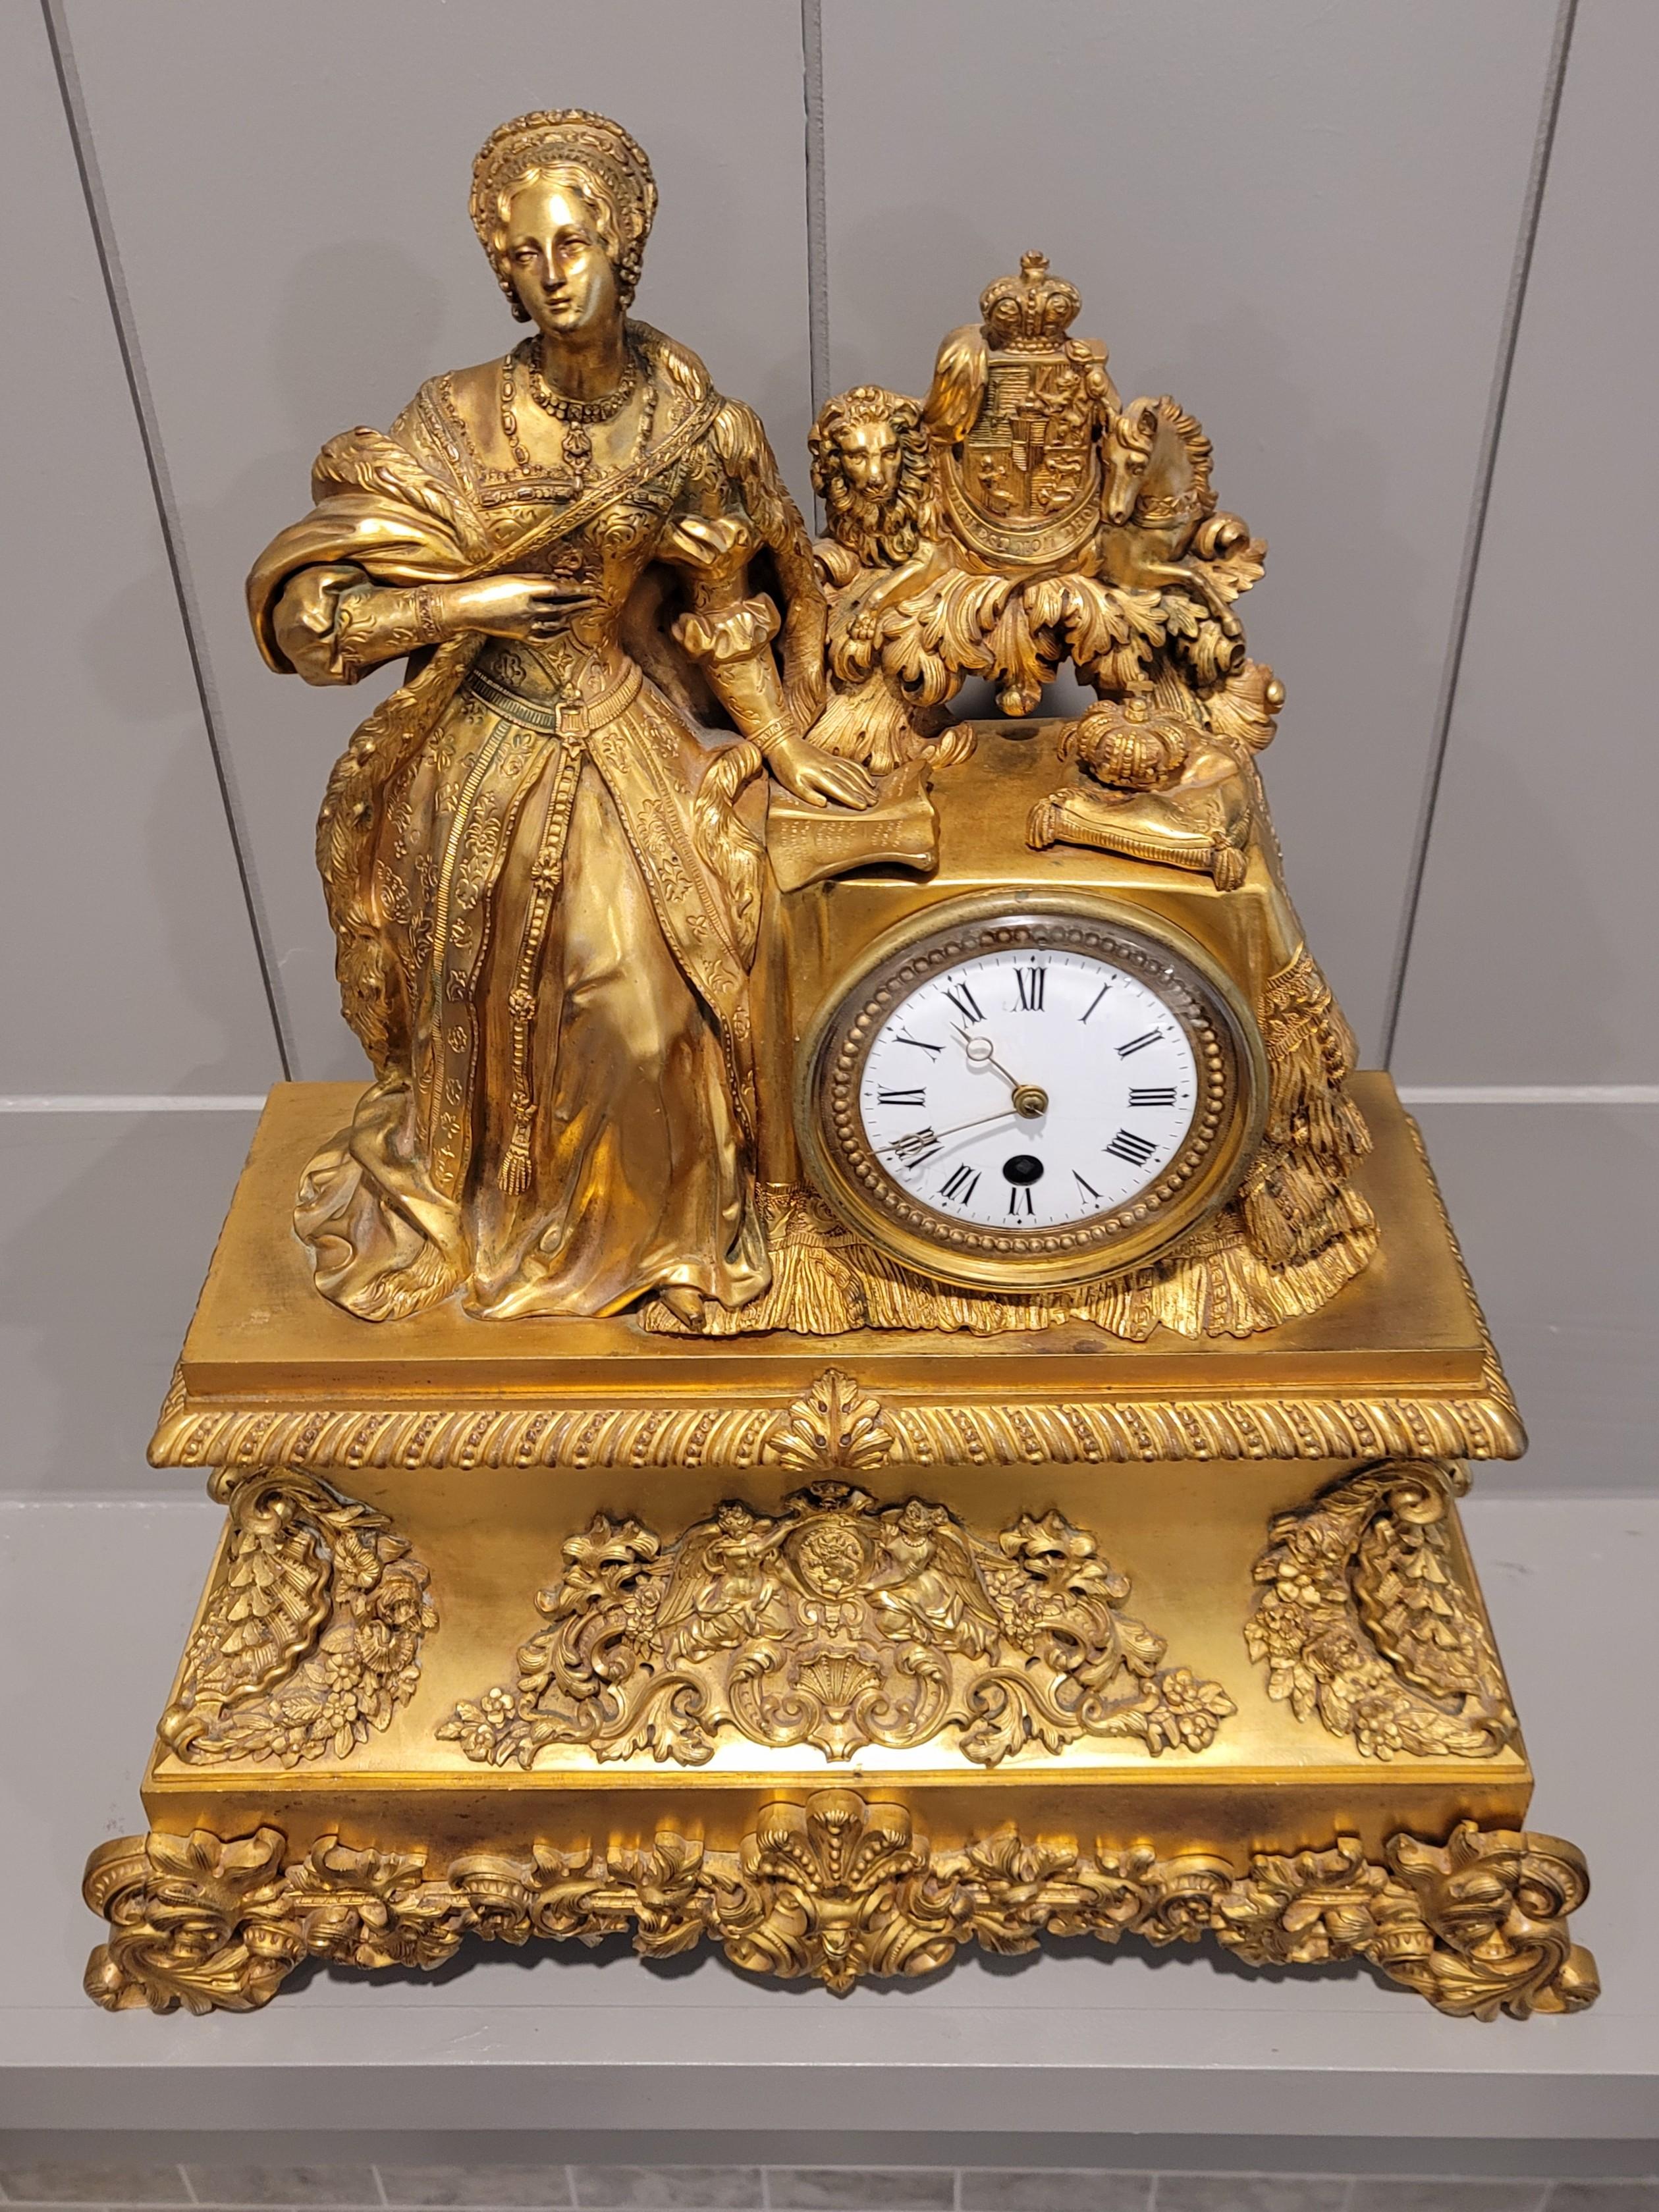 A most impressive 200-year old French Restoration Period (1814-1830) Charles X (1824-1830) fire-gilded bronze ormolu mantel clock. Likely attributed to Le Roy Et Fils. 

Originating in Paris, France, dating to the early/mid-19th century, circa